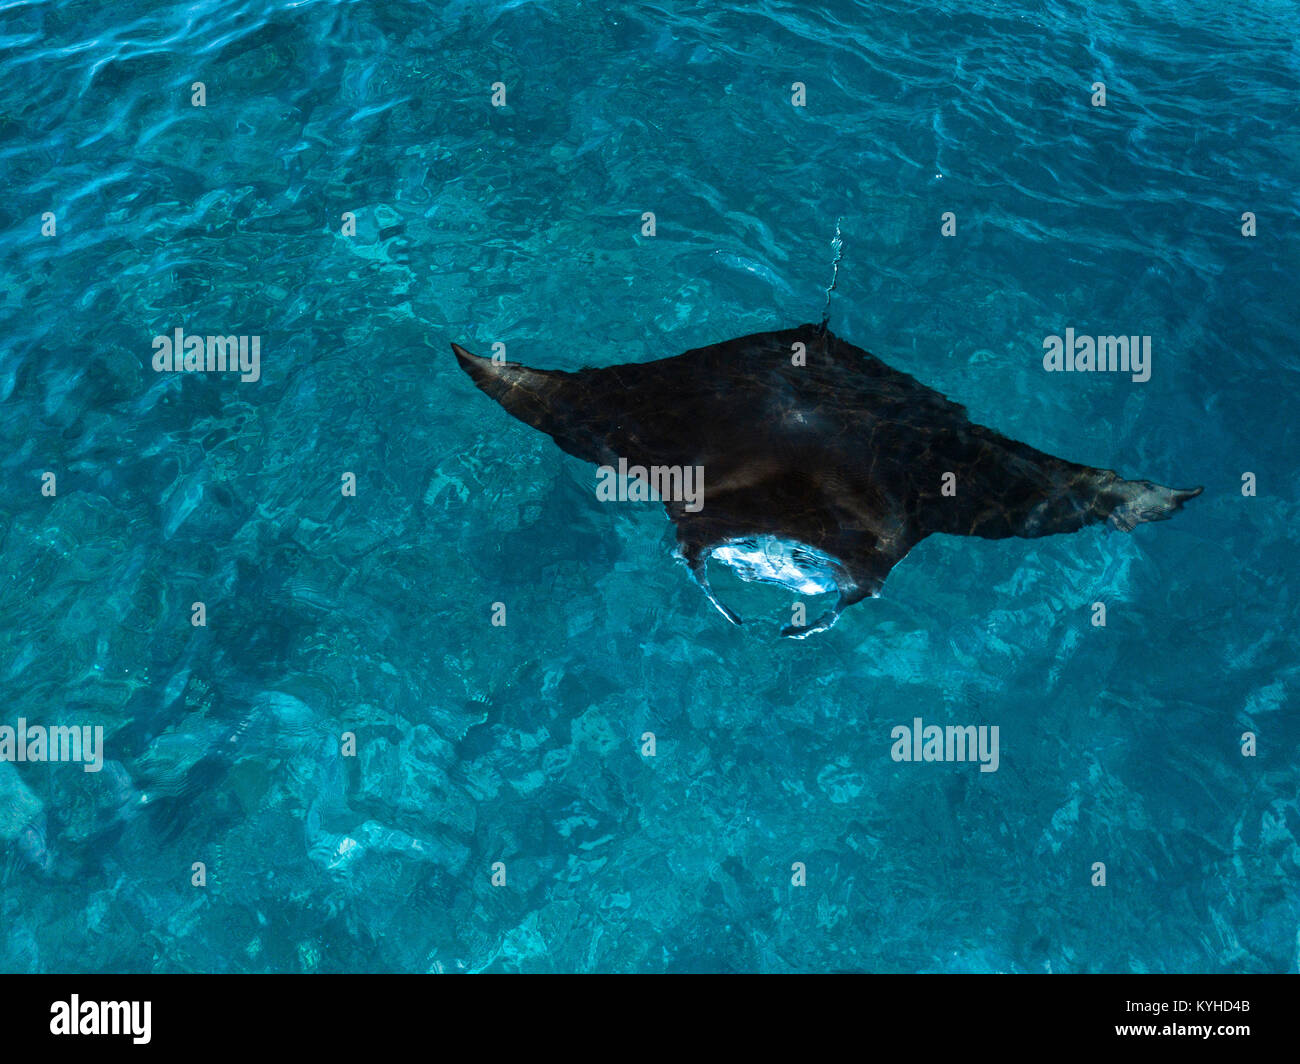 Aerial photo of a reef manta (Manta alfredi) feeding at the surface in clear blue water at the site 'Manta Alley' in Komodo National Park, Indonesia. Stock Photo